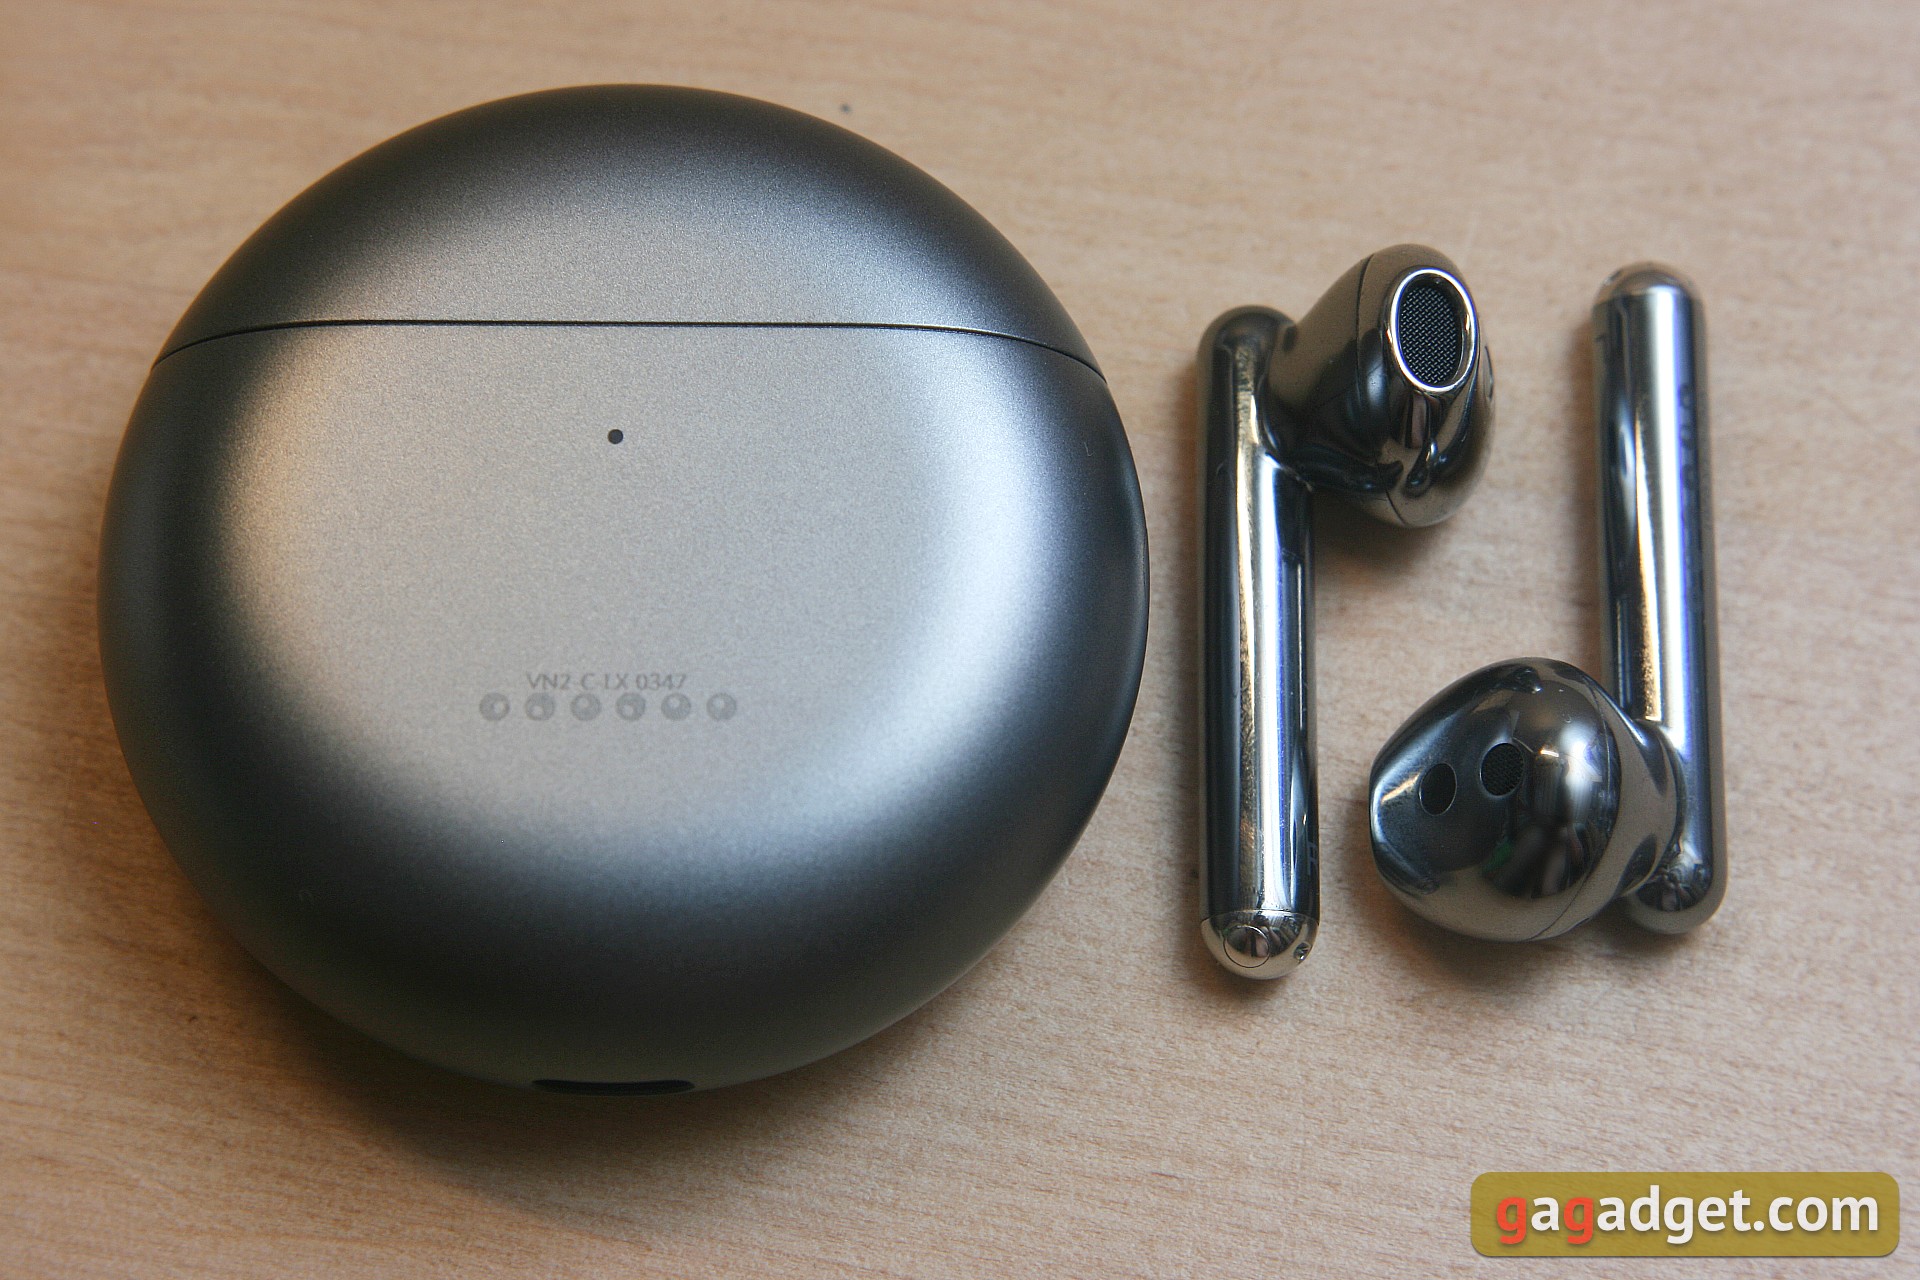 Huawei FreeBuds 4i wireless earbuds deliver noise-cancelling at  surprisingly low price